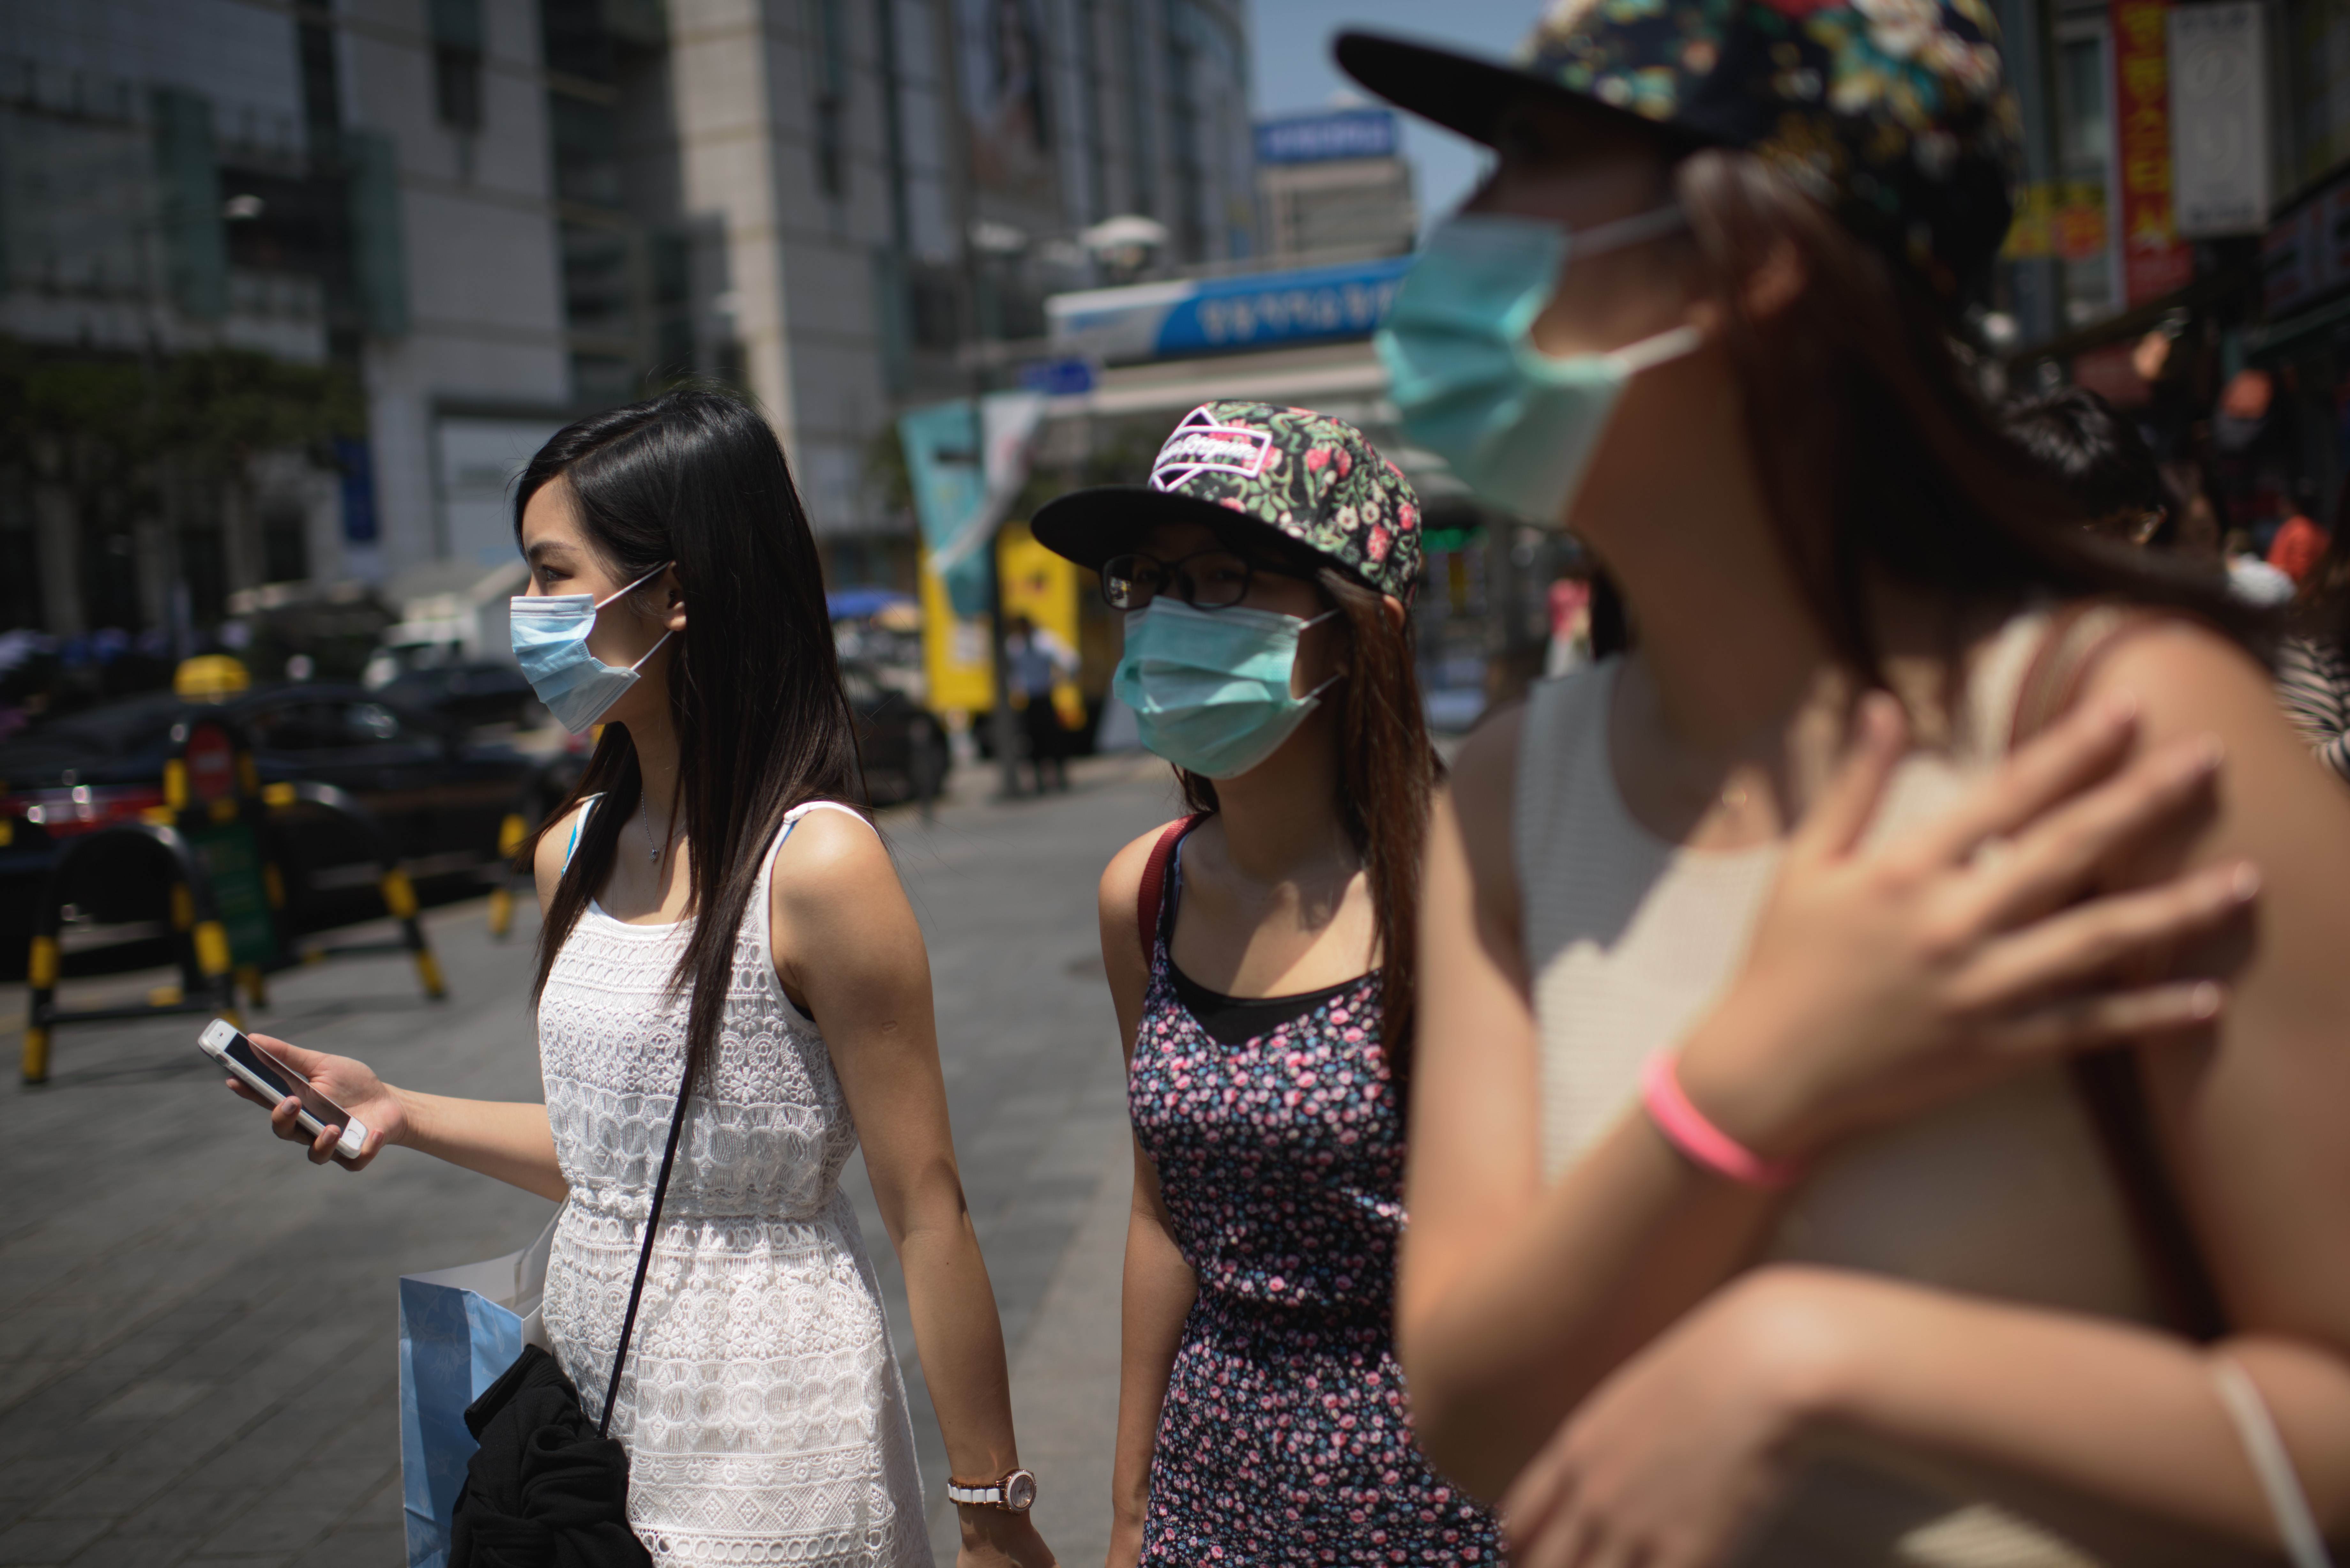 More than 90 travel agents in Taiwan have received requests from travellers to cancel trips to Seoul, where tourists have taken to wearing face masks following the deadly Mers outbreak. Photo: AFP